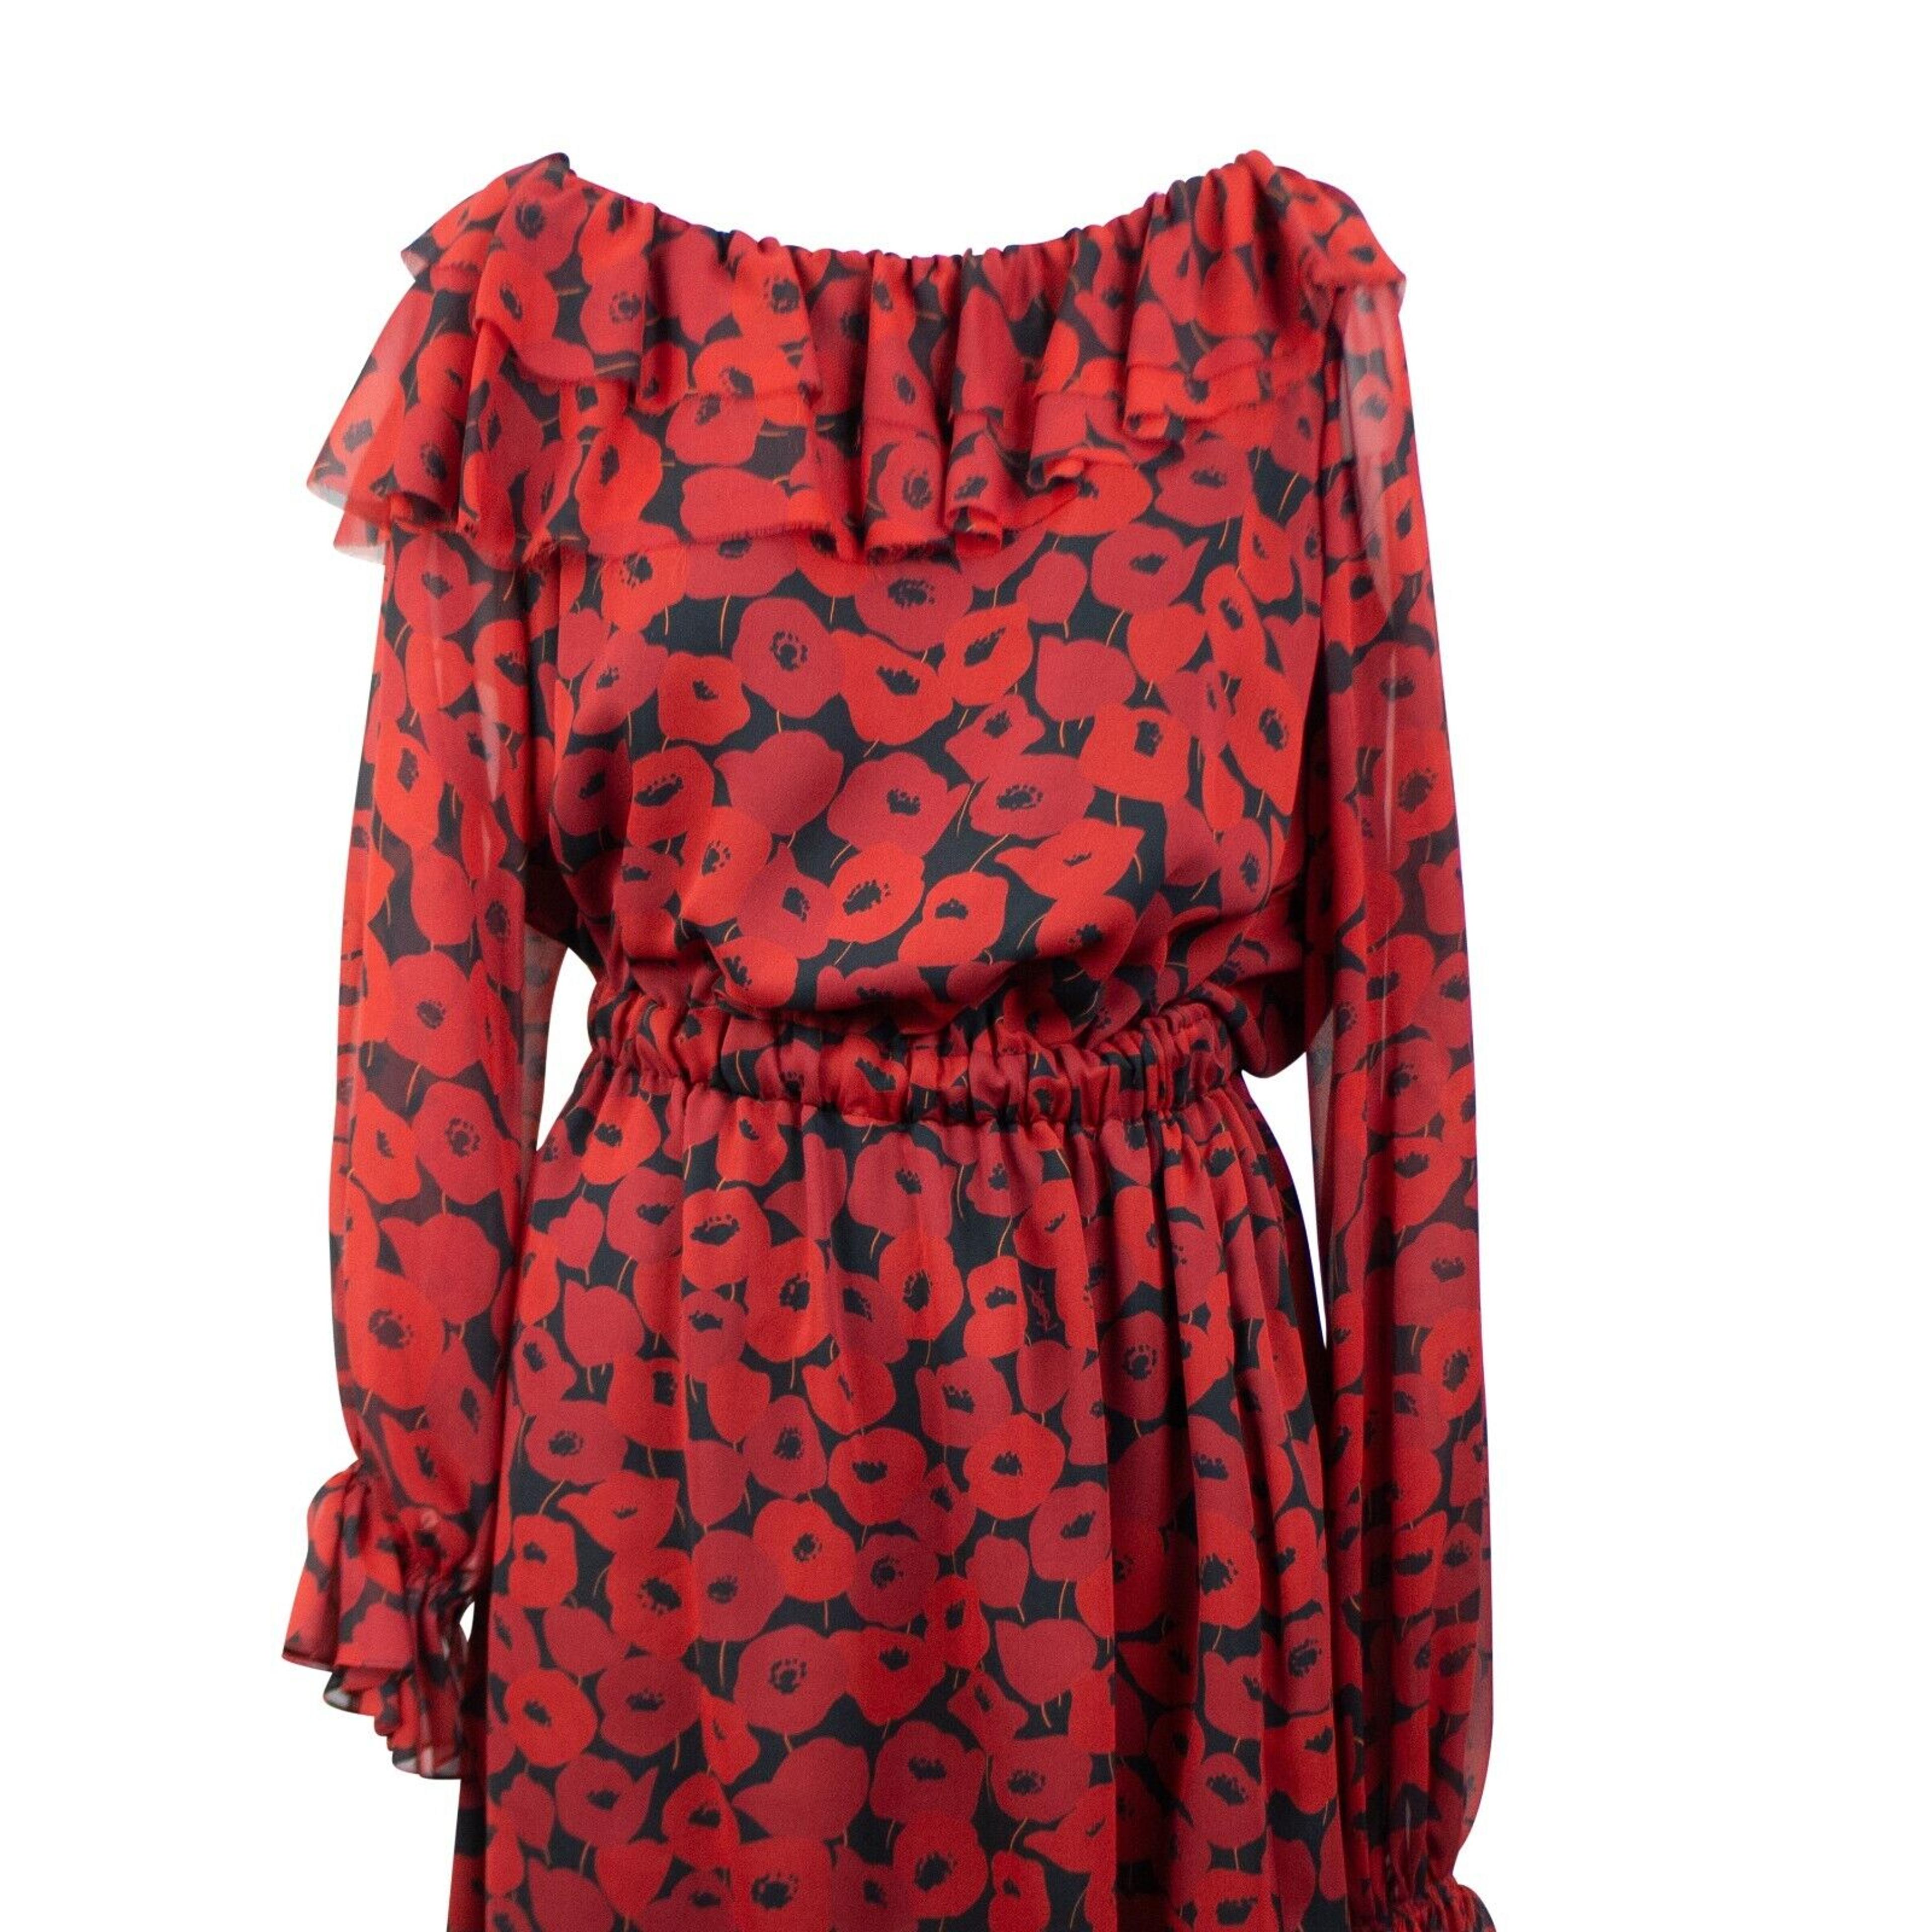 Alternate View 2 of Women's Red Off The Shoulder Floral Dress